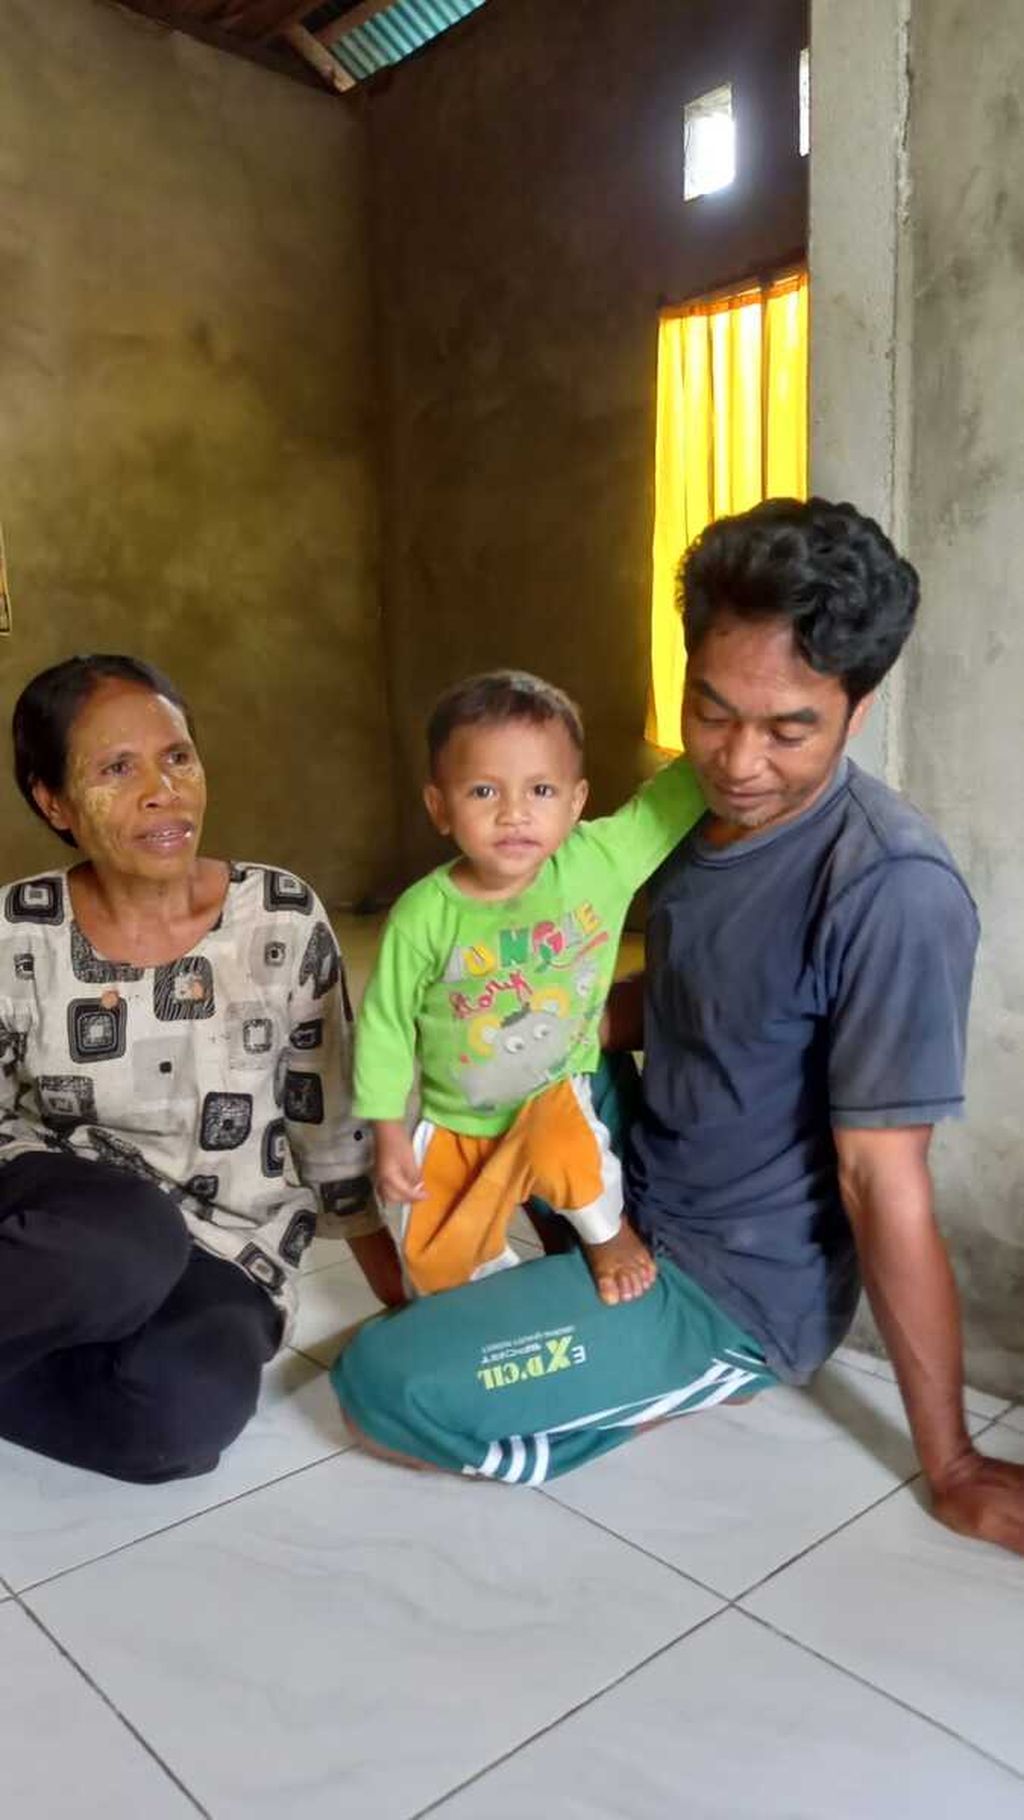 Jasman Abdul Rahim (1.5), a malnourished toddler in Wayaua Village, South East Bacan District, South Halmahera. The parenting style of parents who do not provide nutritious food for their children is one of the causes of stunting in South Halmahera..